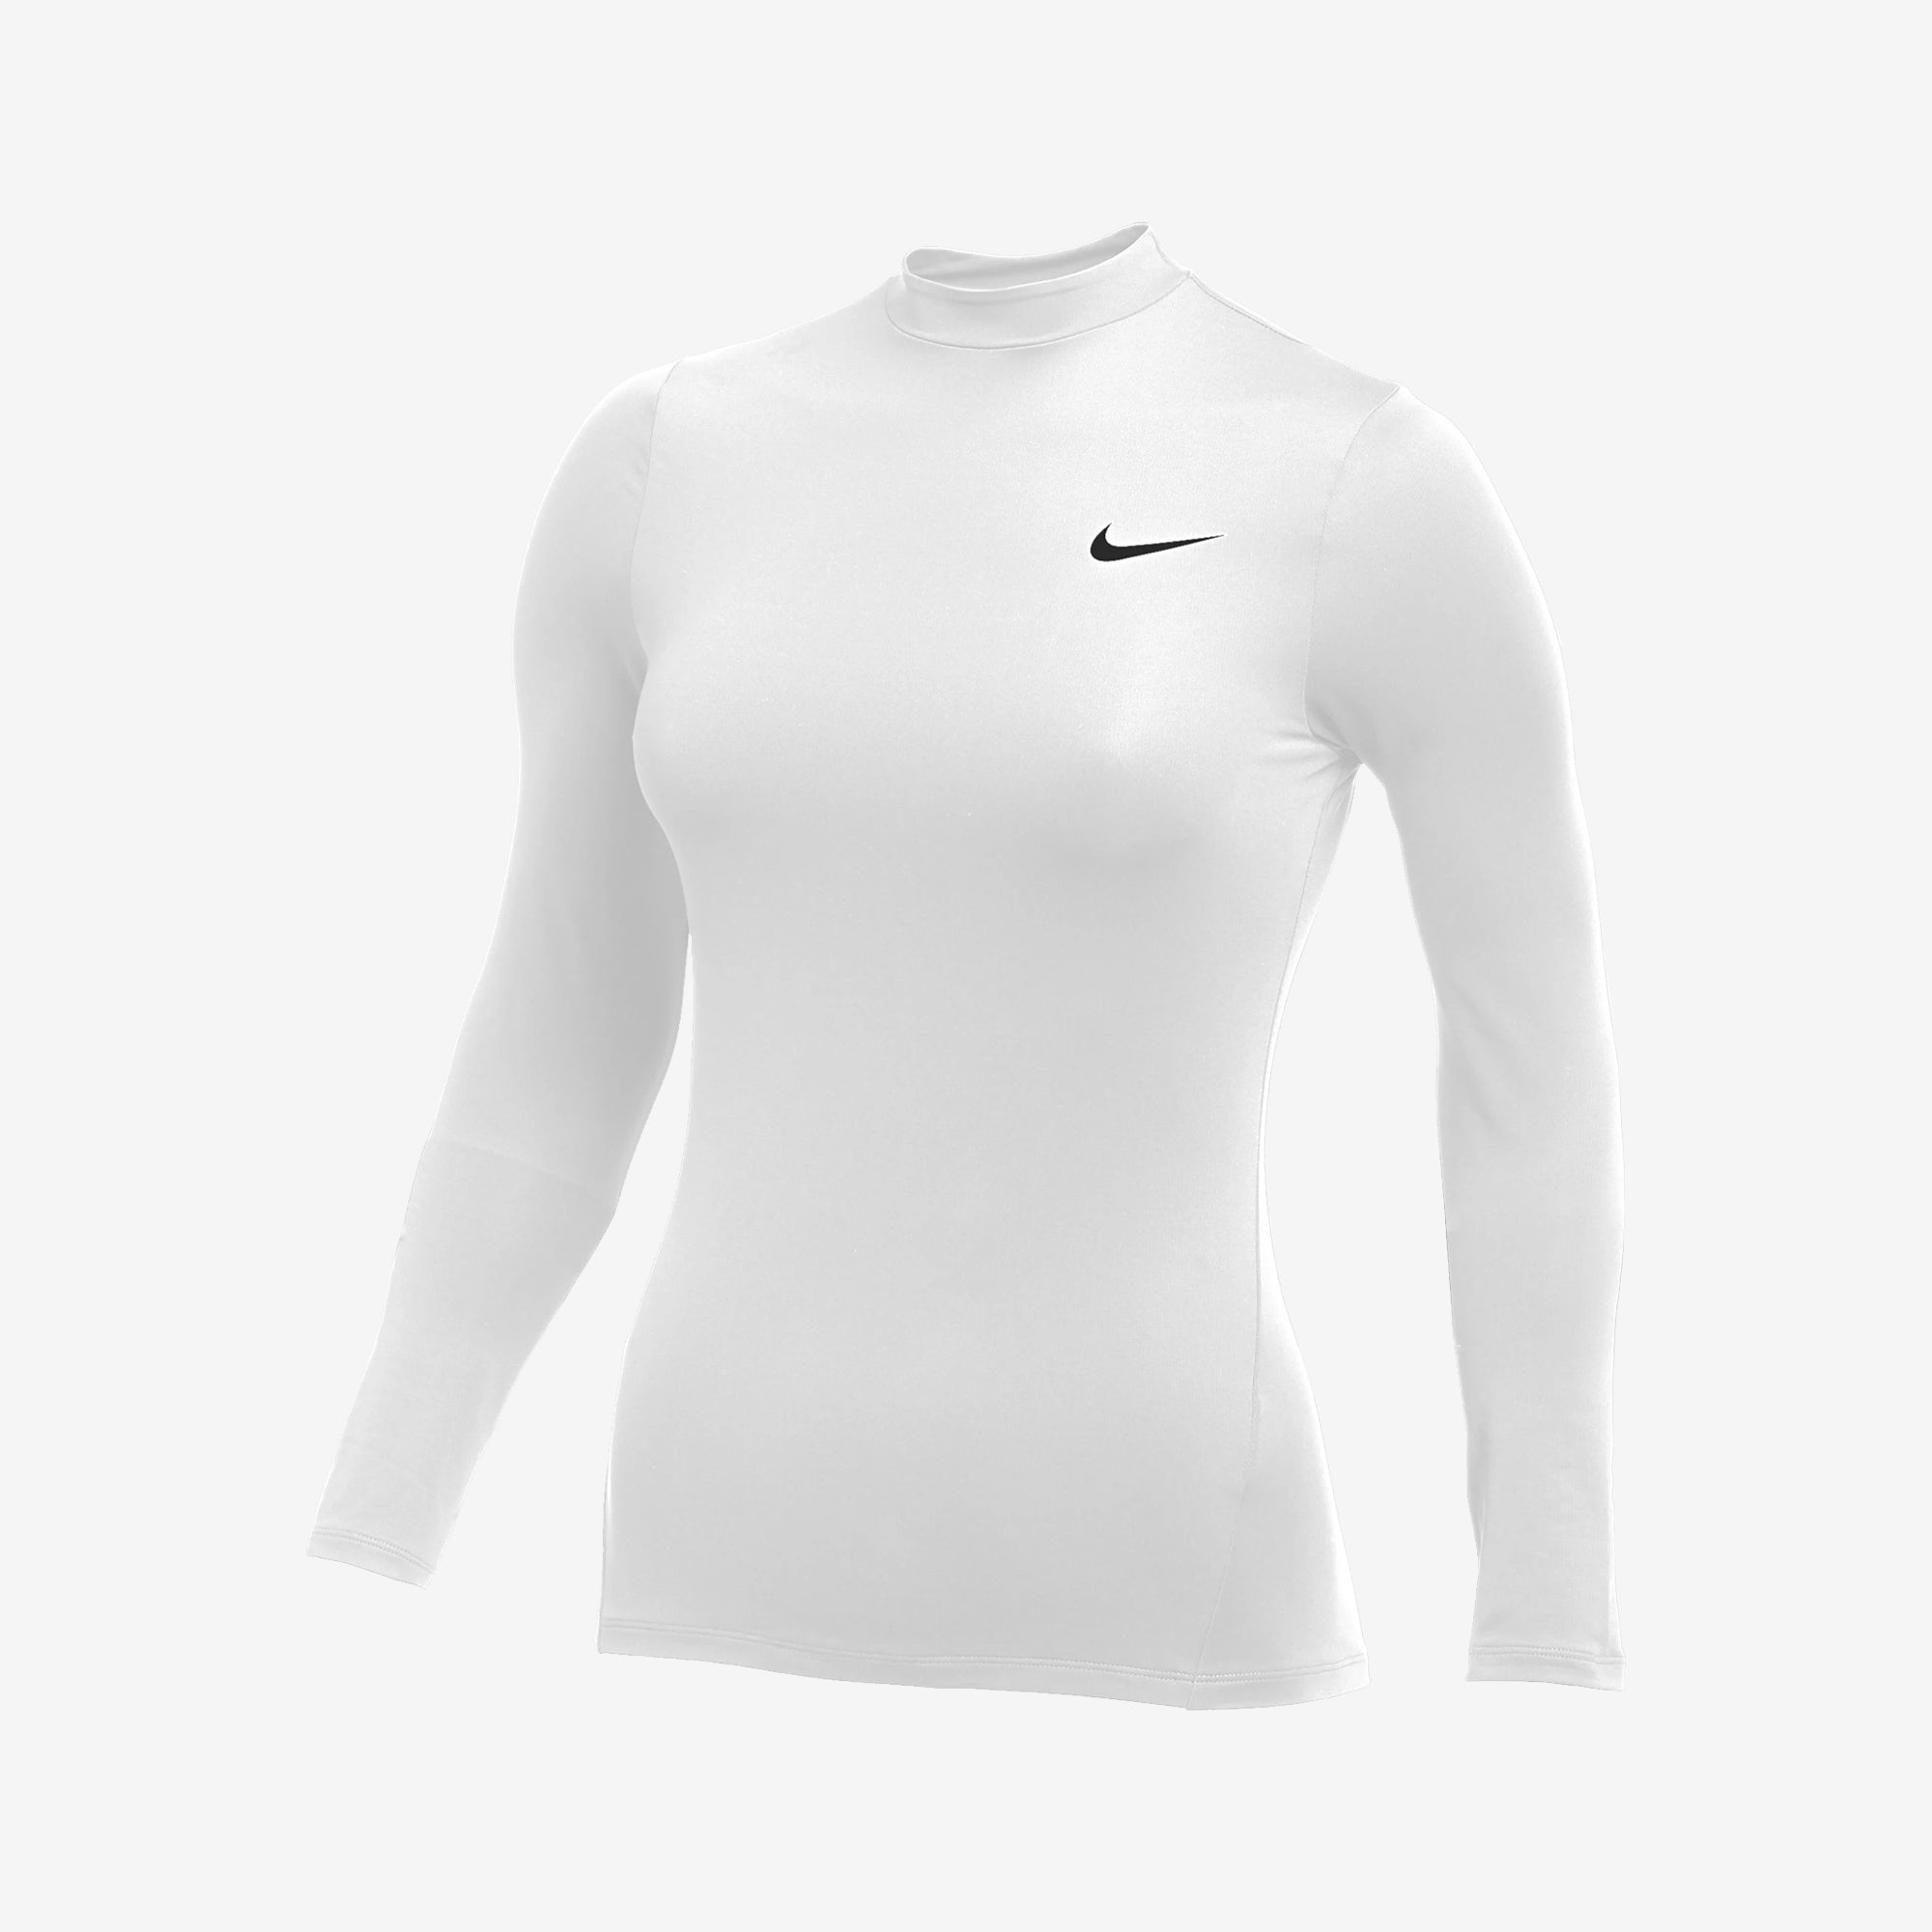 Berouw Historicus roterend Nike Pro Women's Long Sleeve Warm Top White